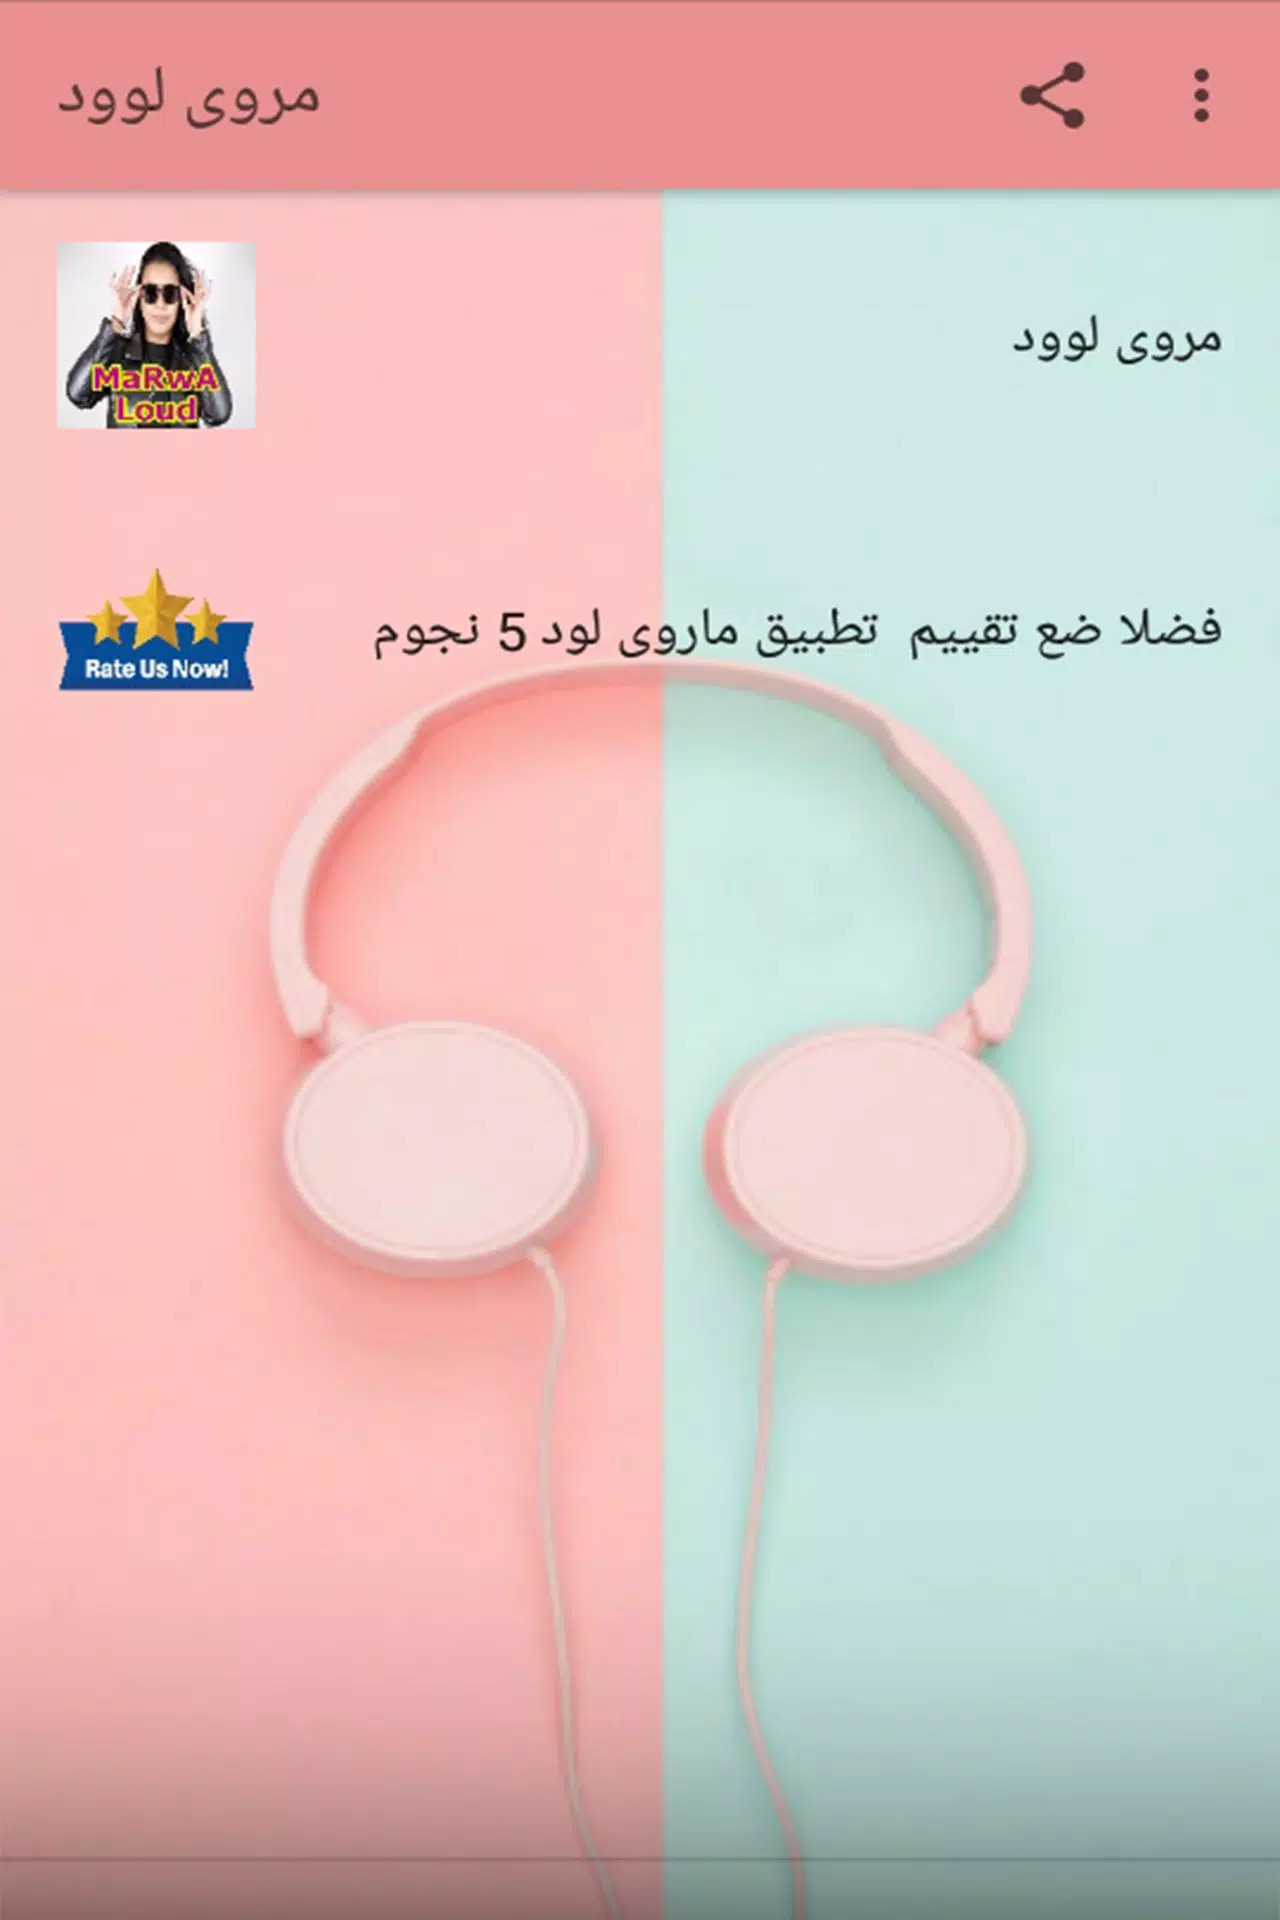 Marwa Loud Mp3- اغاني مروى لود for Android - APK Download